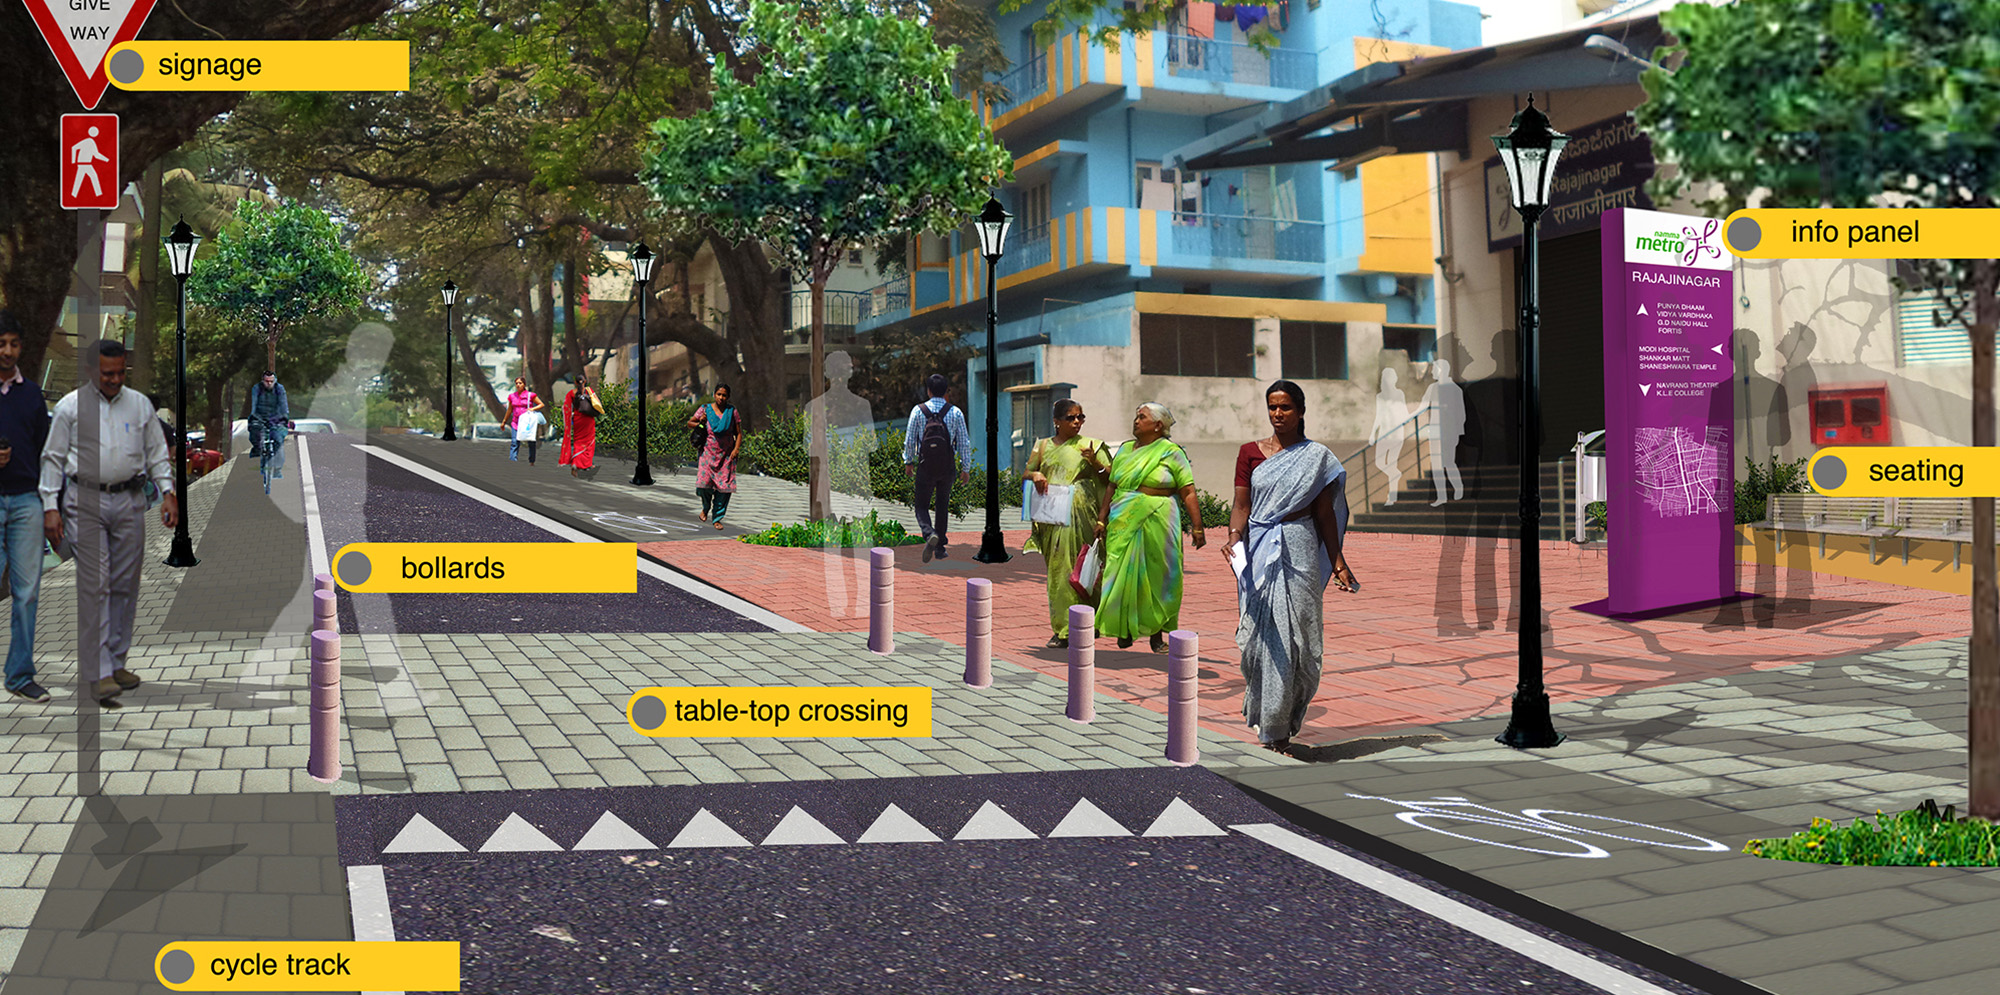 MoUD India labelled rendering of street. For full text, download project PDF below.